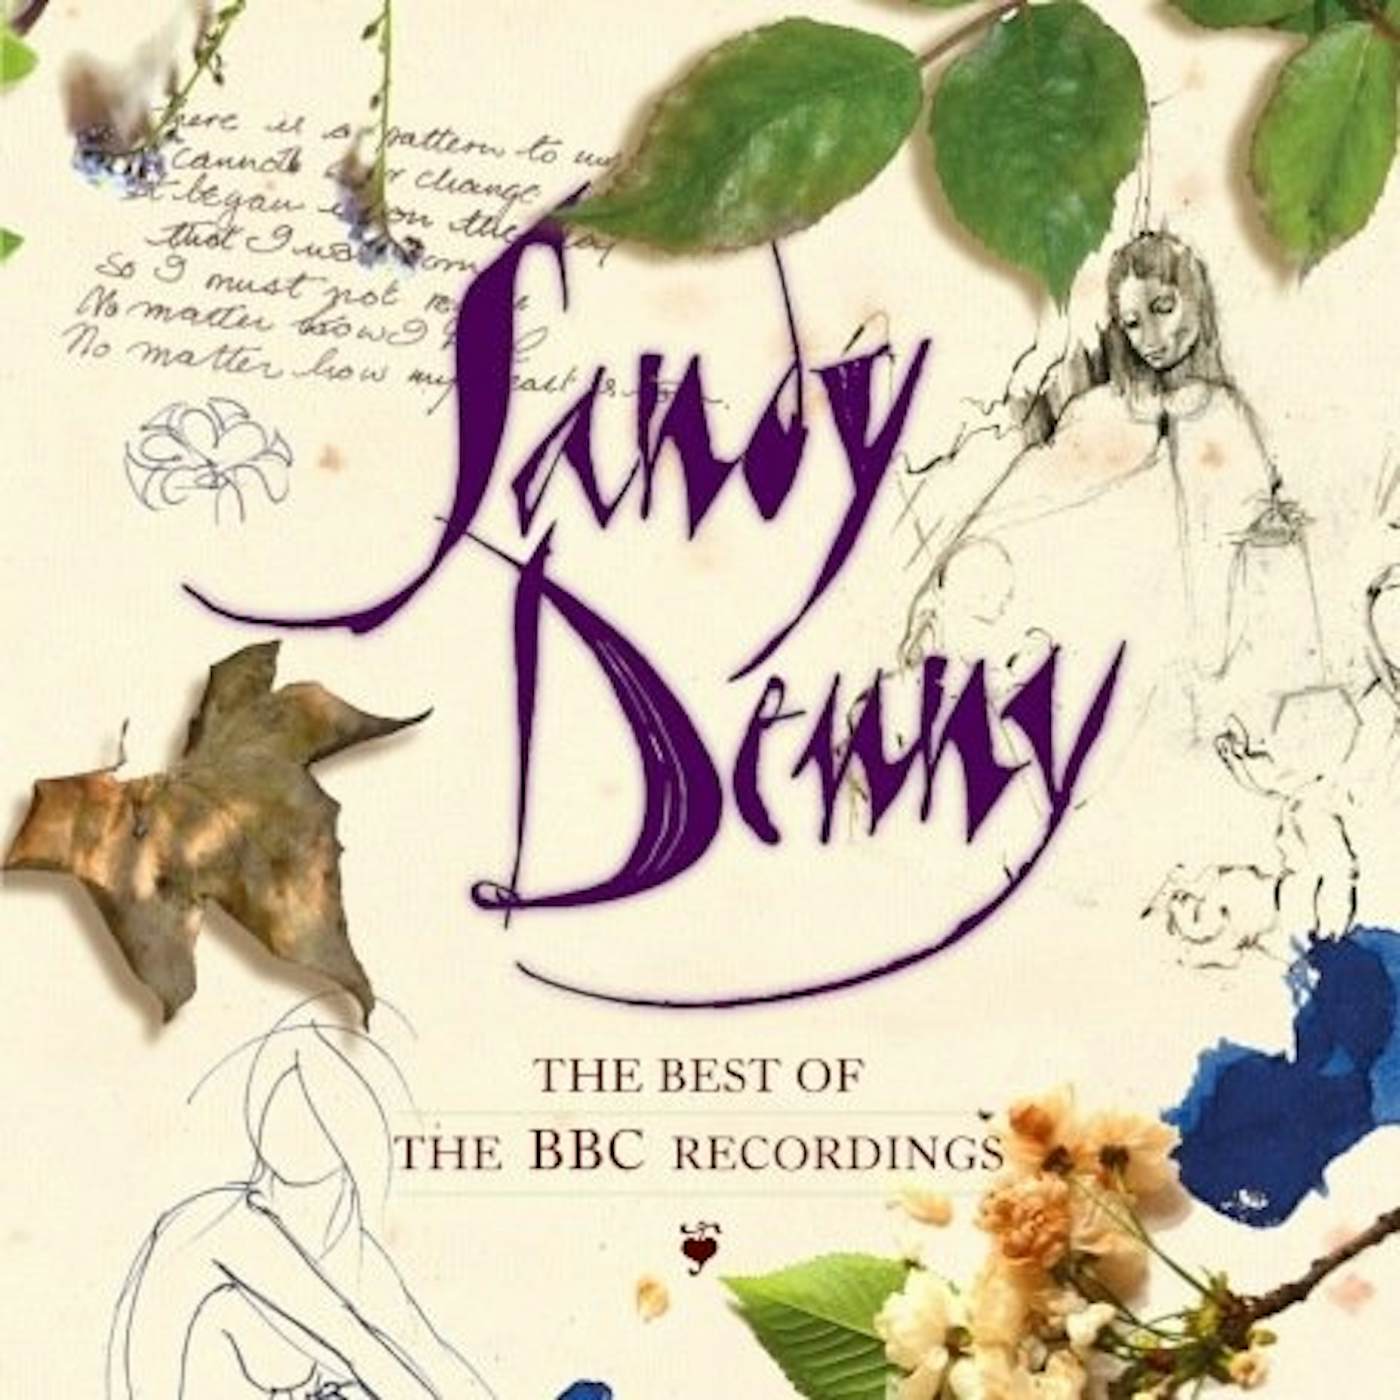 Sandy Denny BEST OF THE BBC RECORDINGS CD